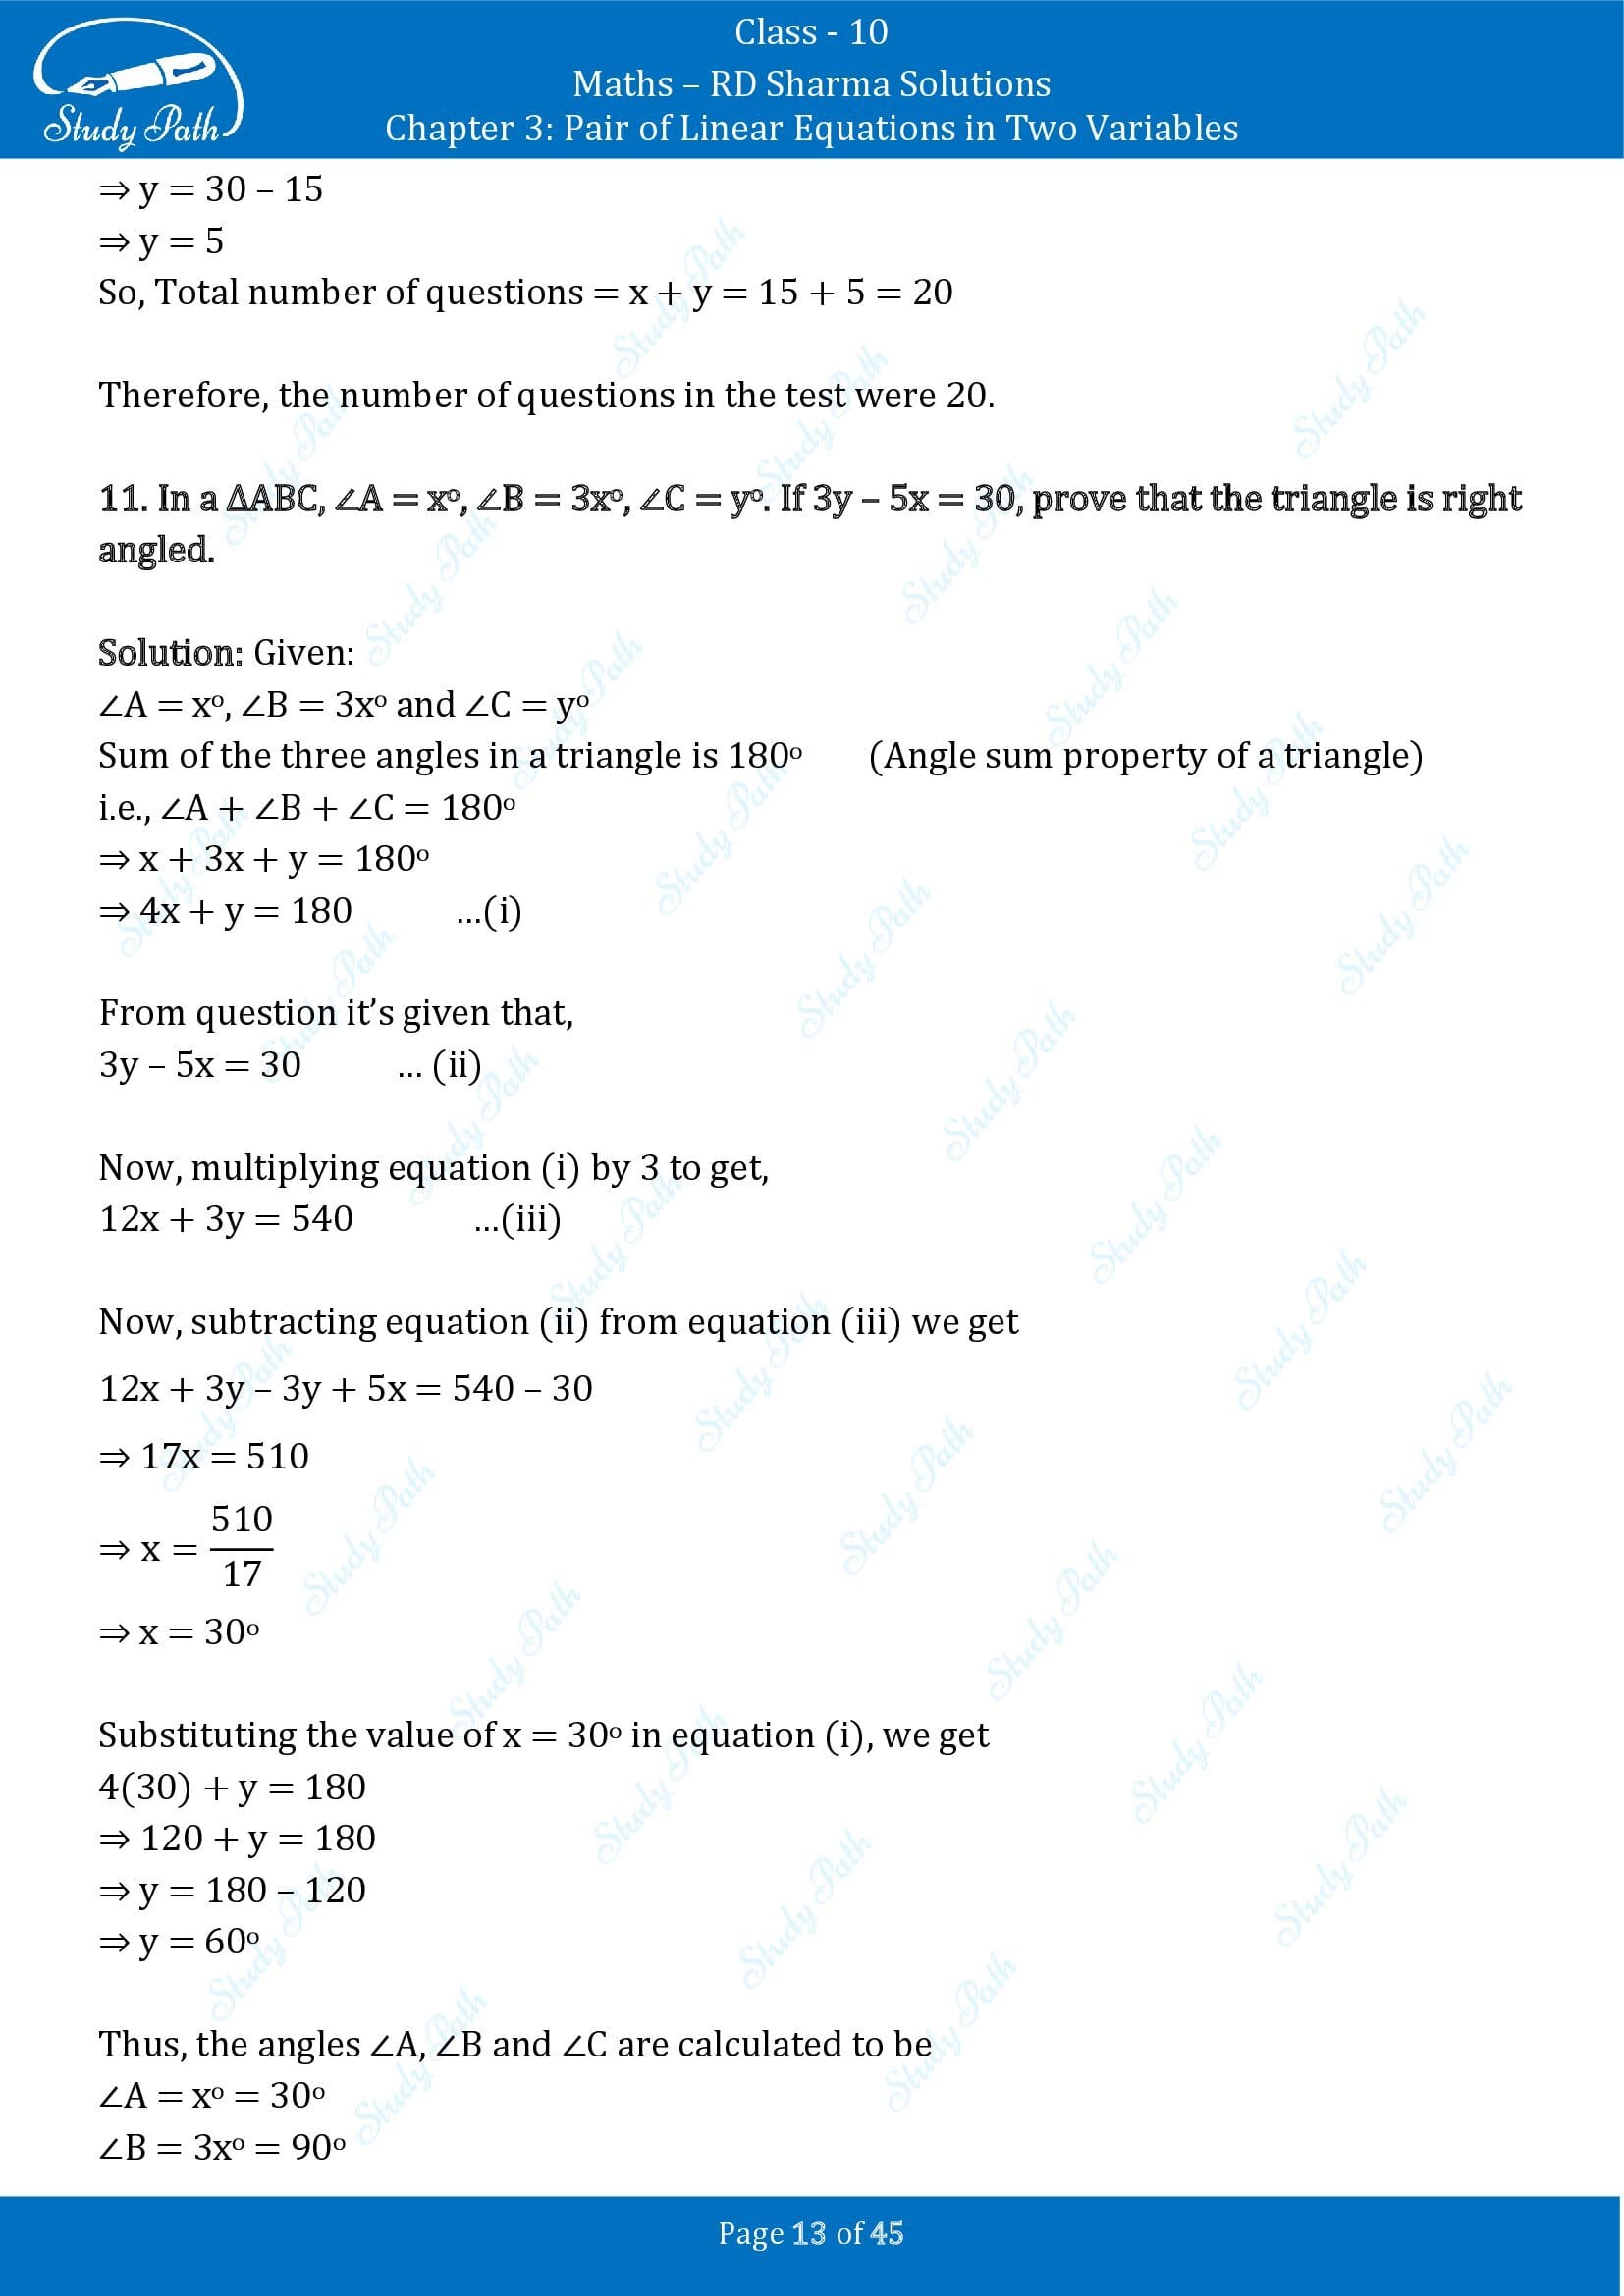 RD Sharma Solutions Class 10 Chapter 3 Pair of Linear Equations in Two Variables Exercise 3.11 00013